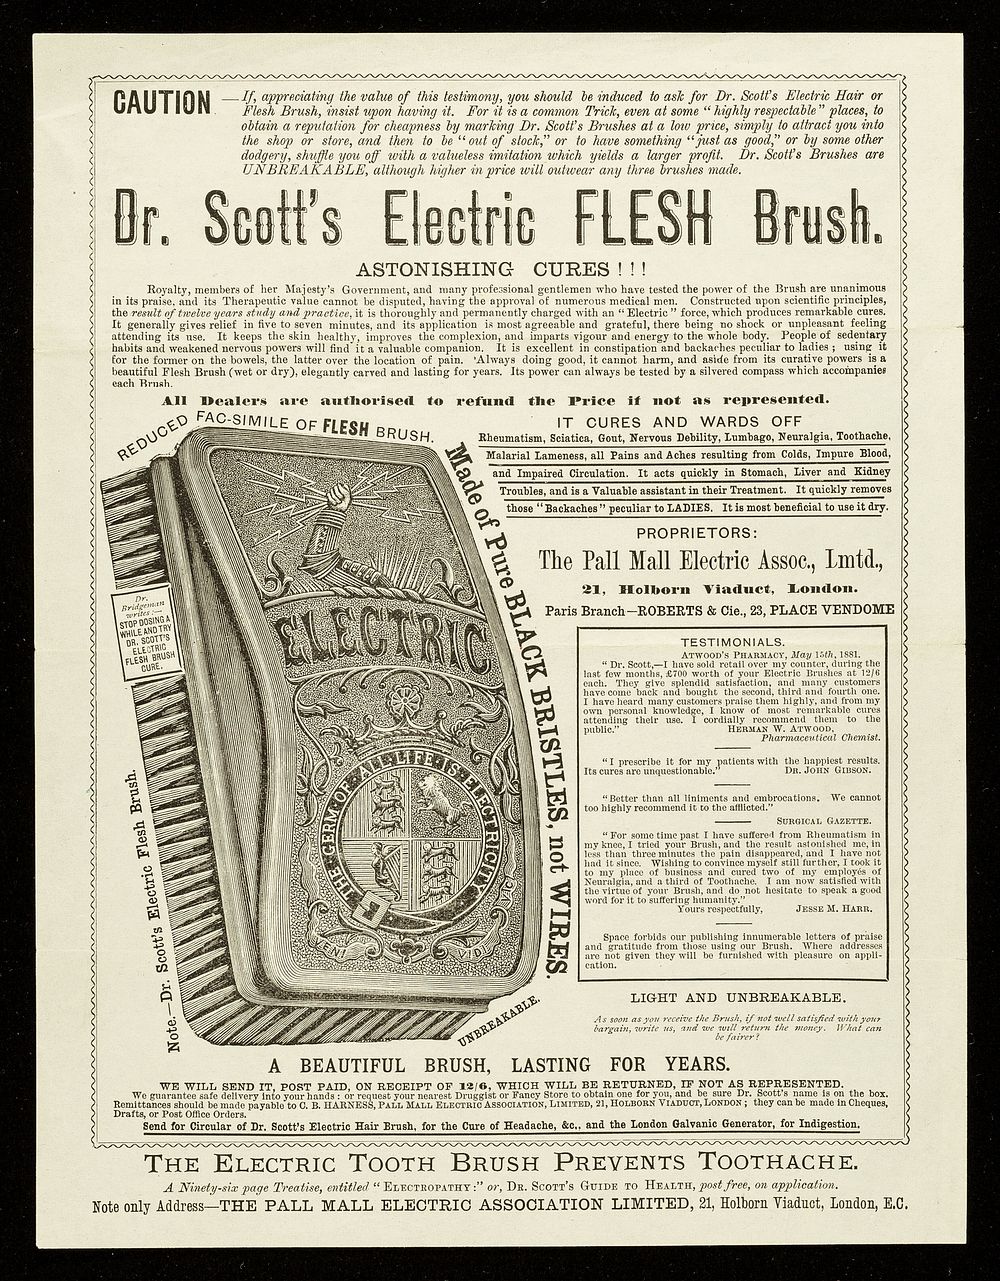 Dr. Scott's electric flesh brush : astonishing cures !!! / by the Pall Mall Electric Association.